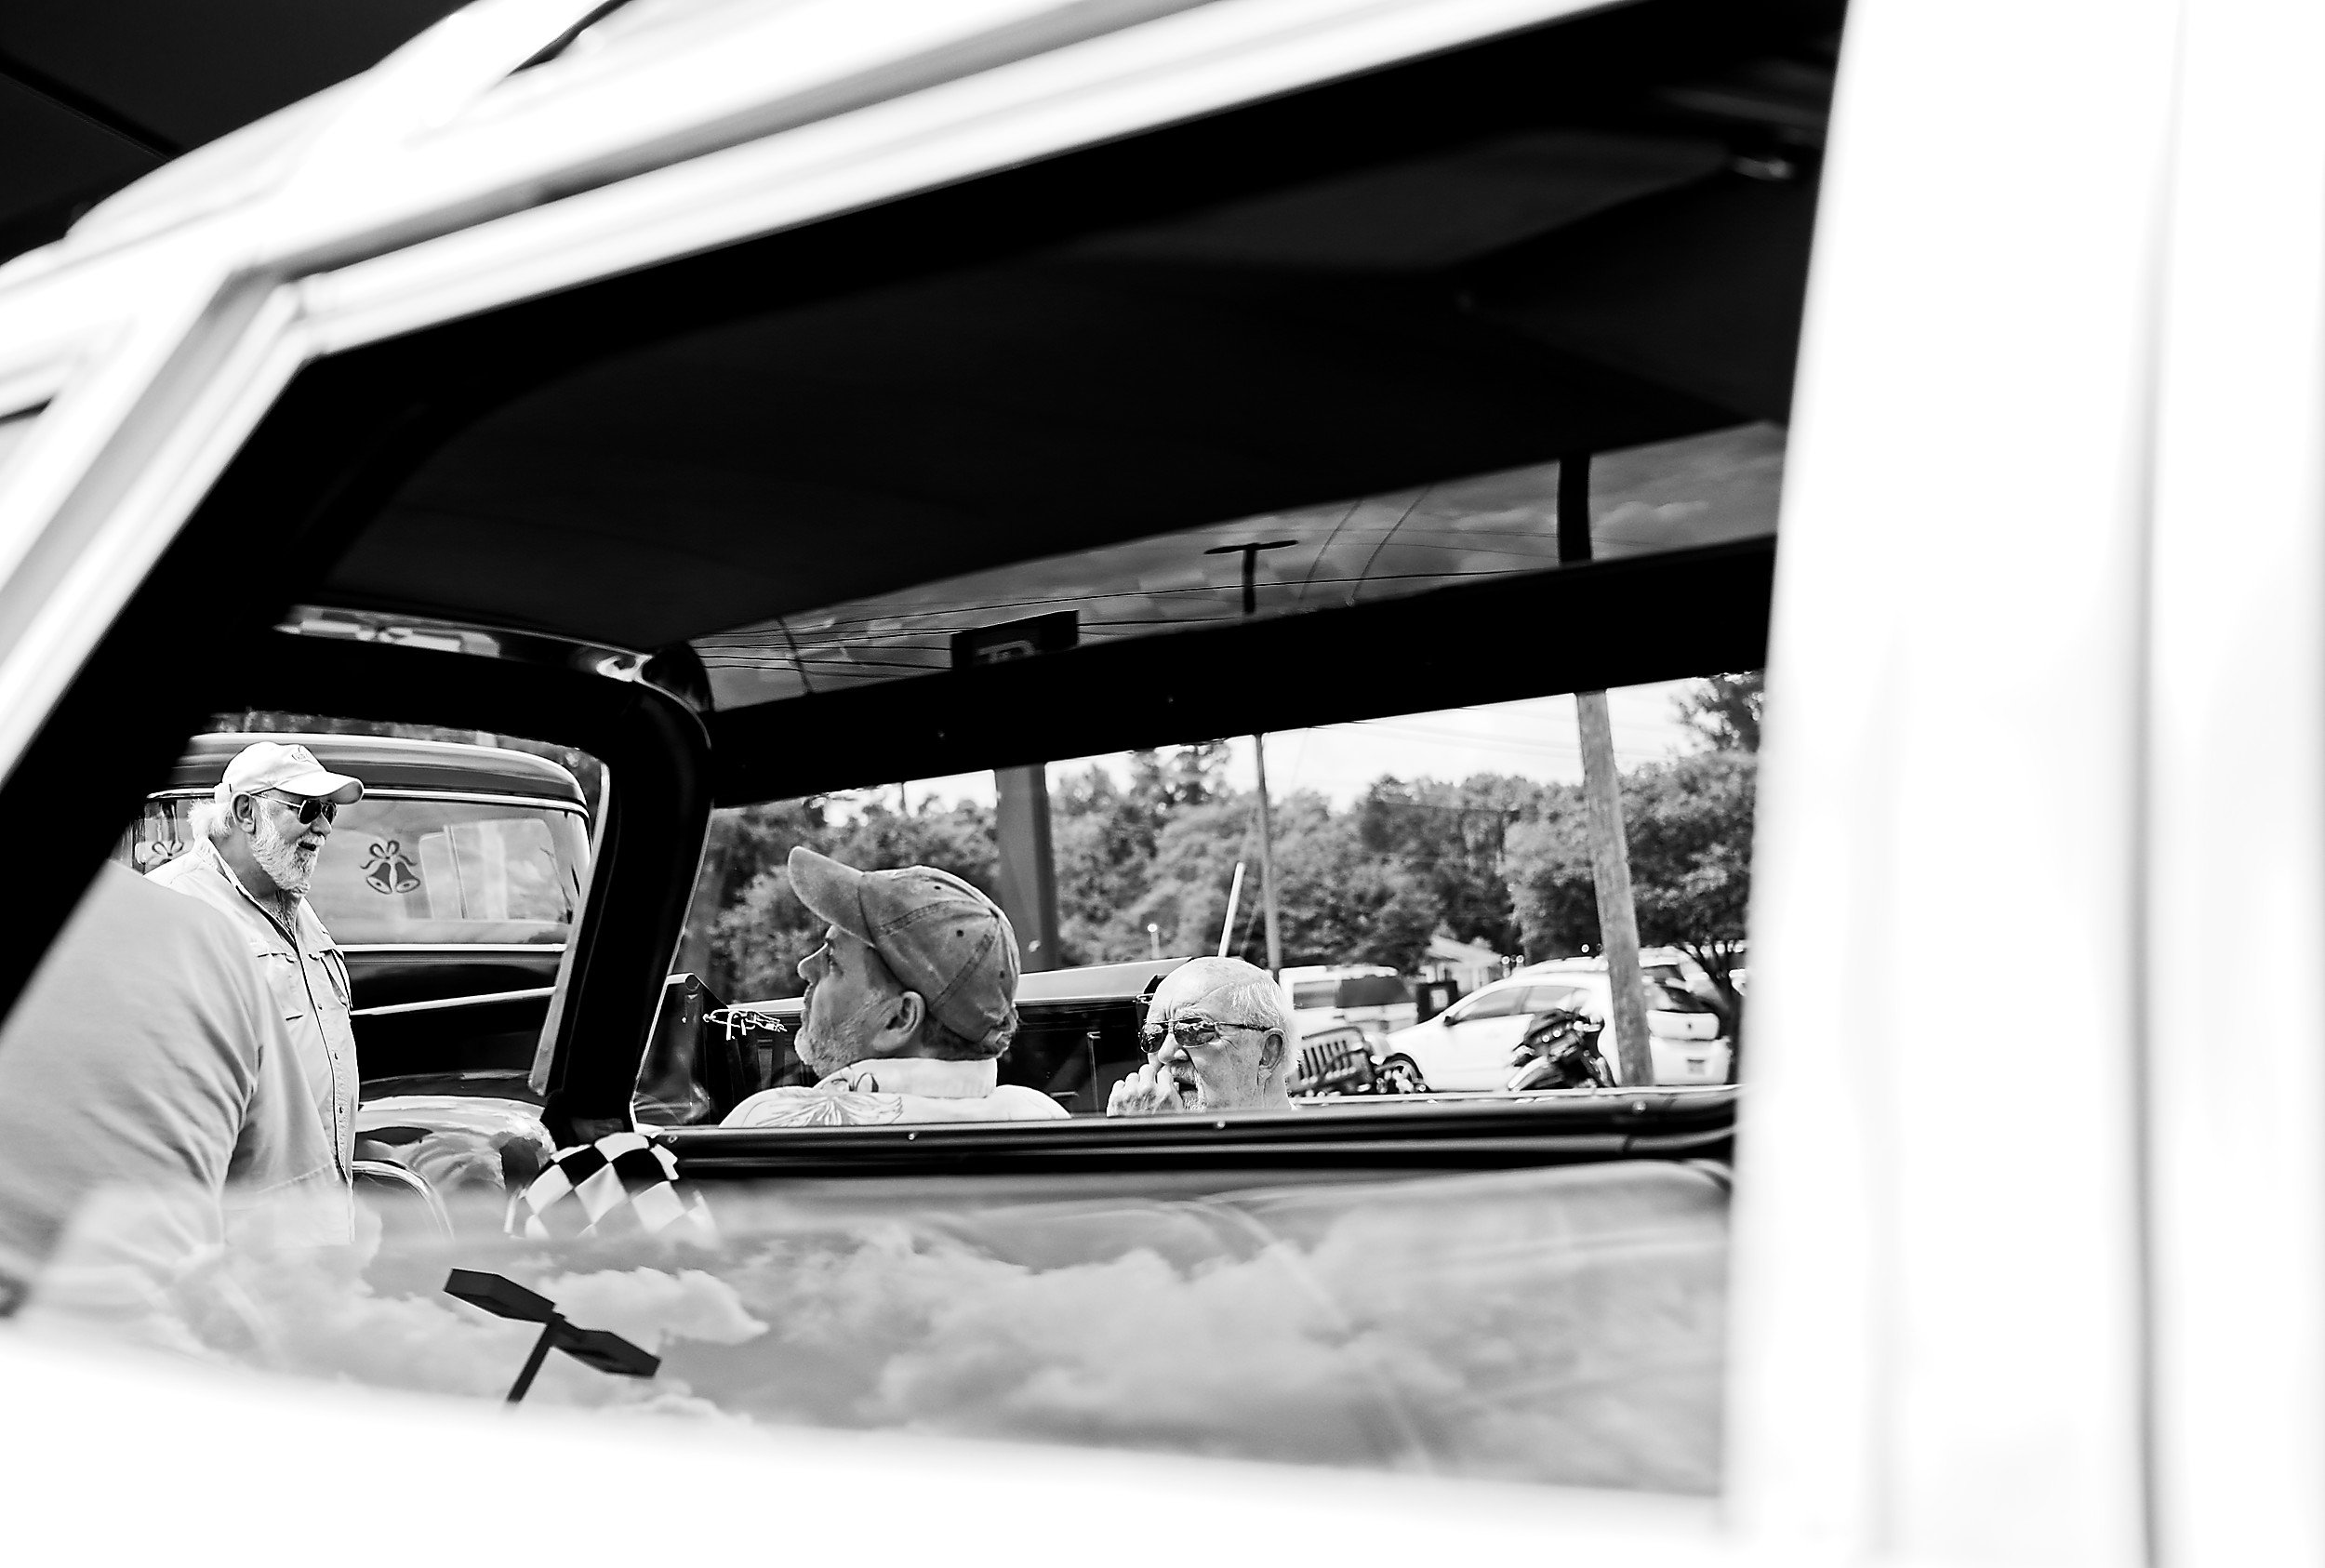  black and white image of several men as seen through the windows of a car 